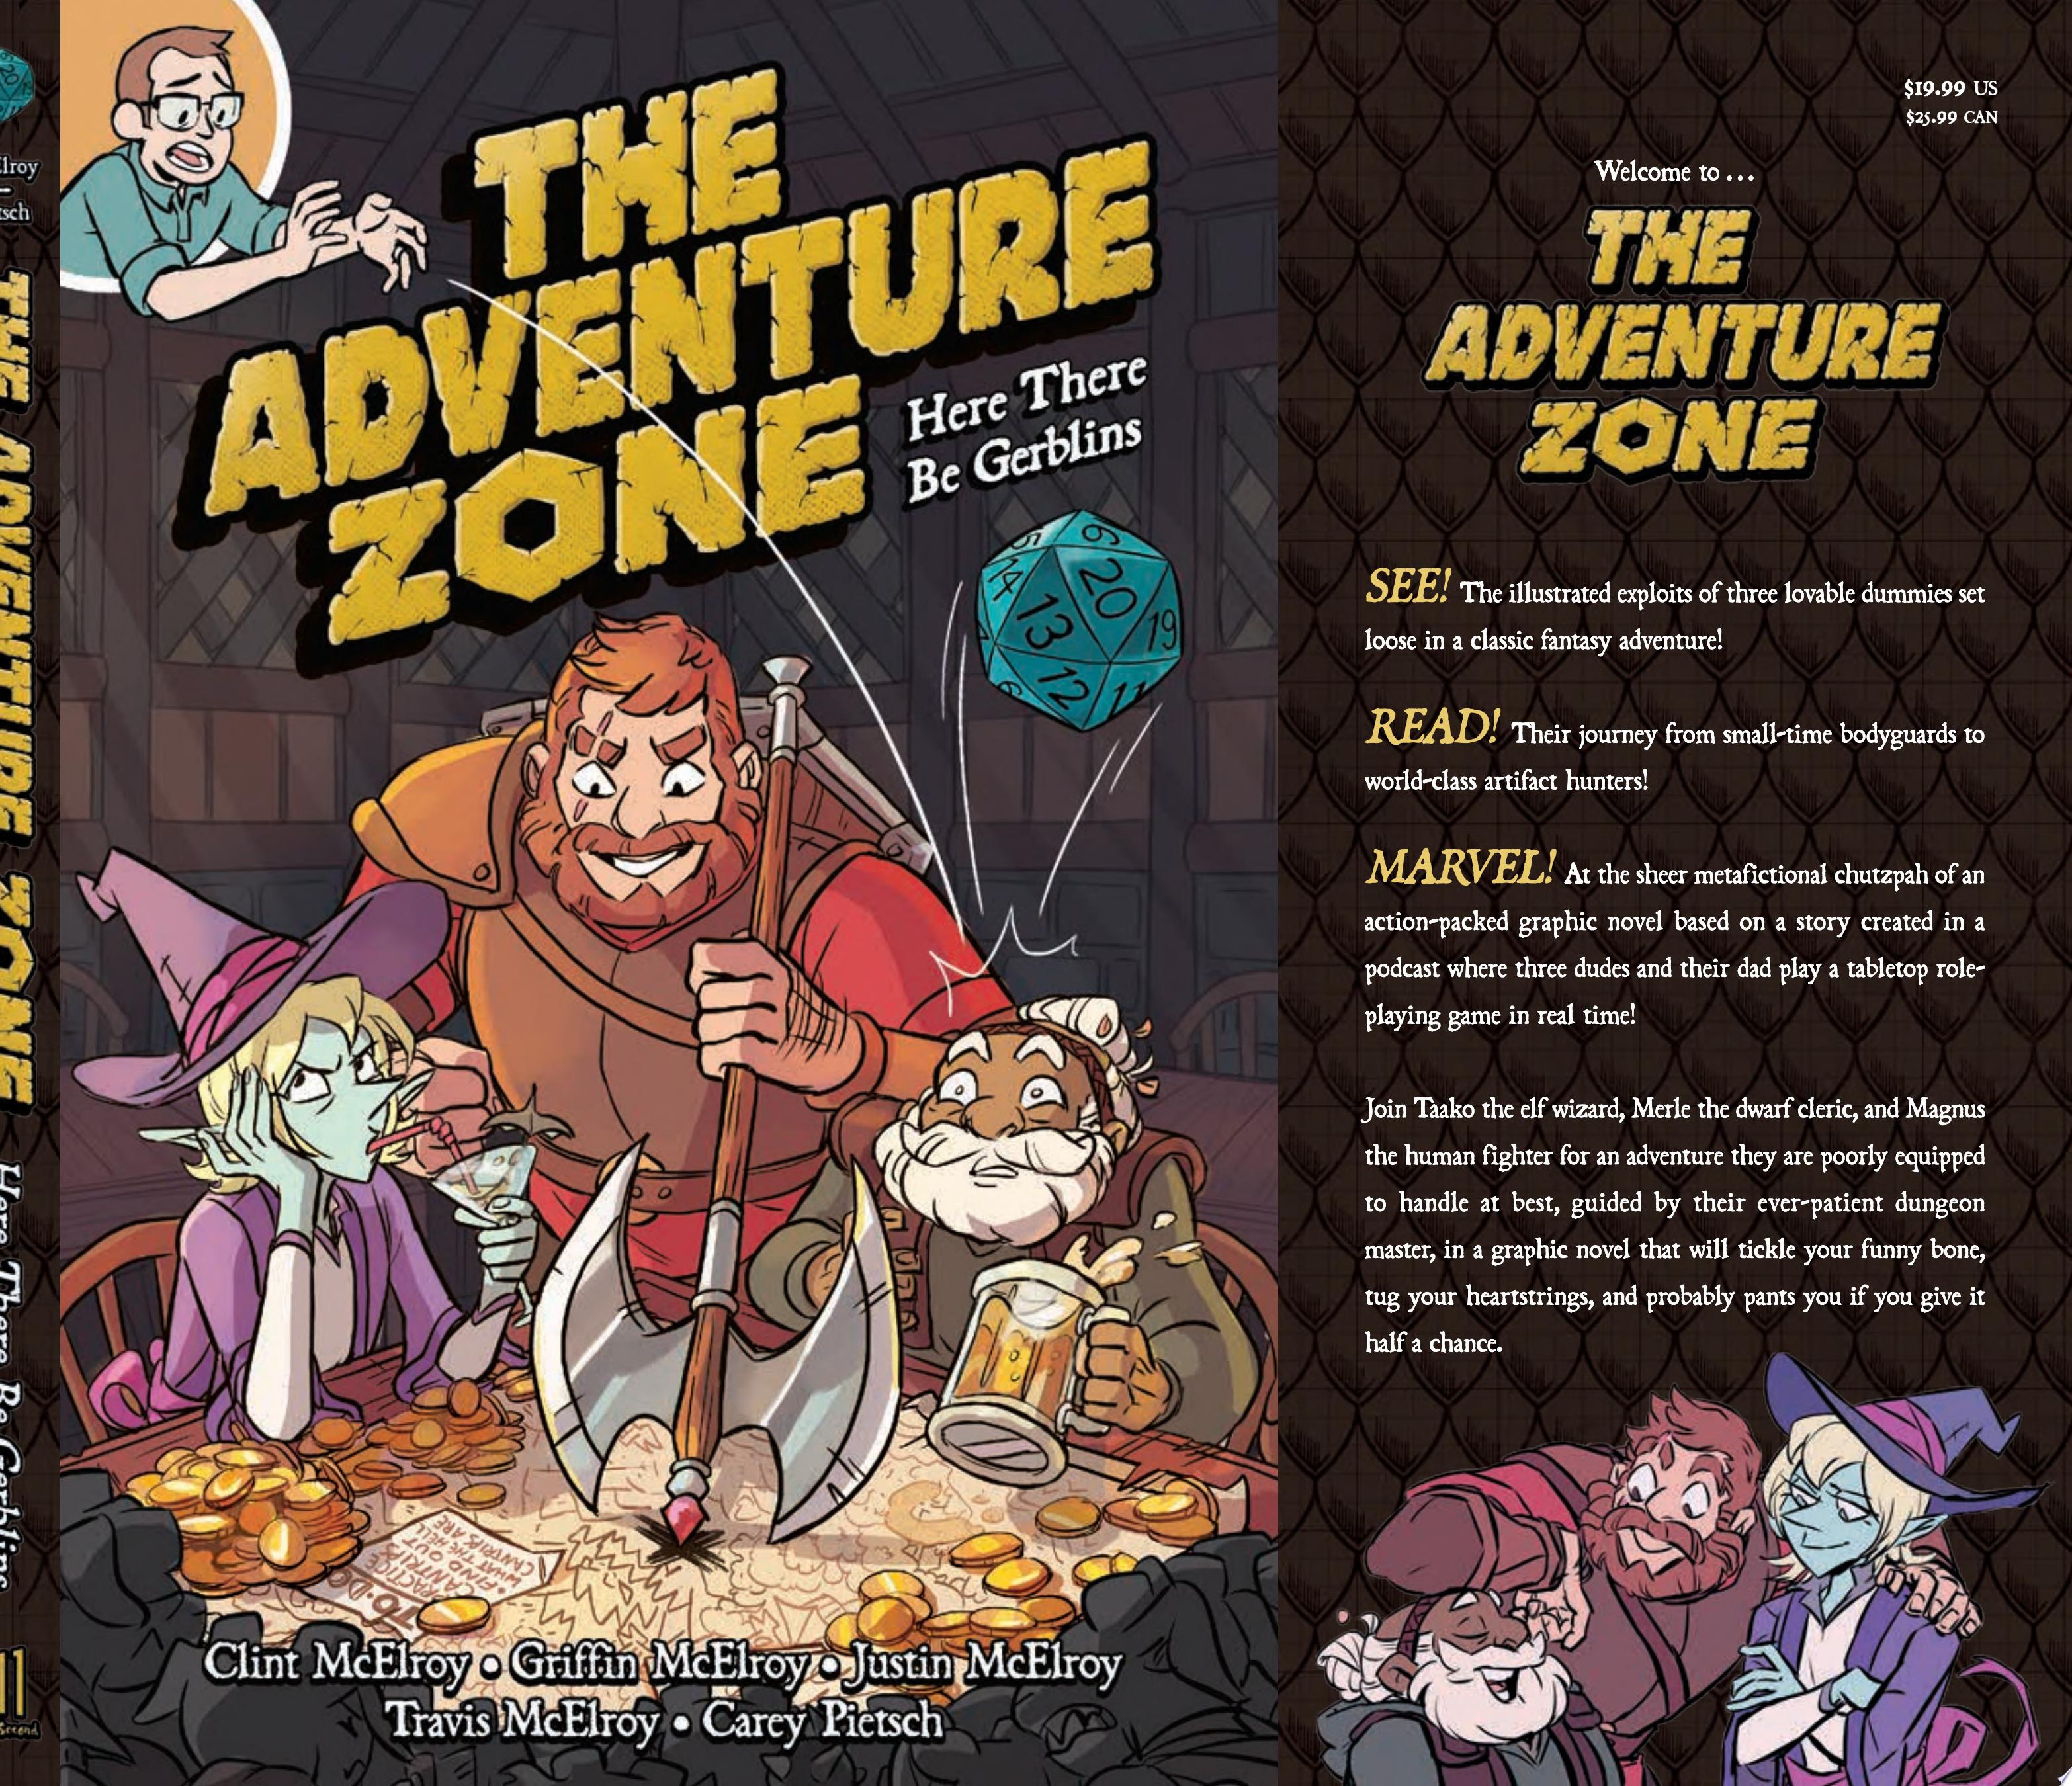 Image for "The Adventure Zone: Here There Be Gerblins"